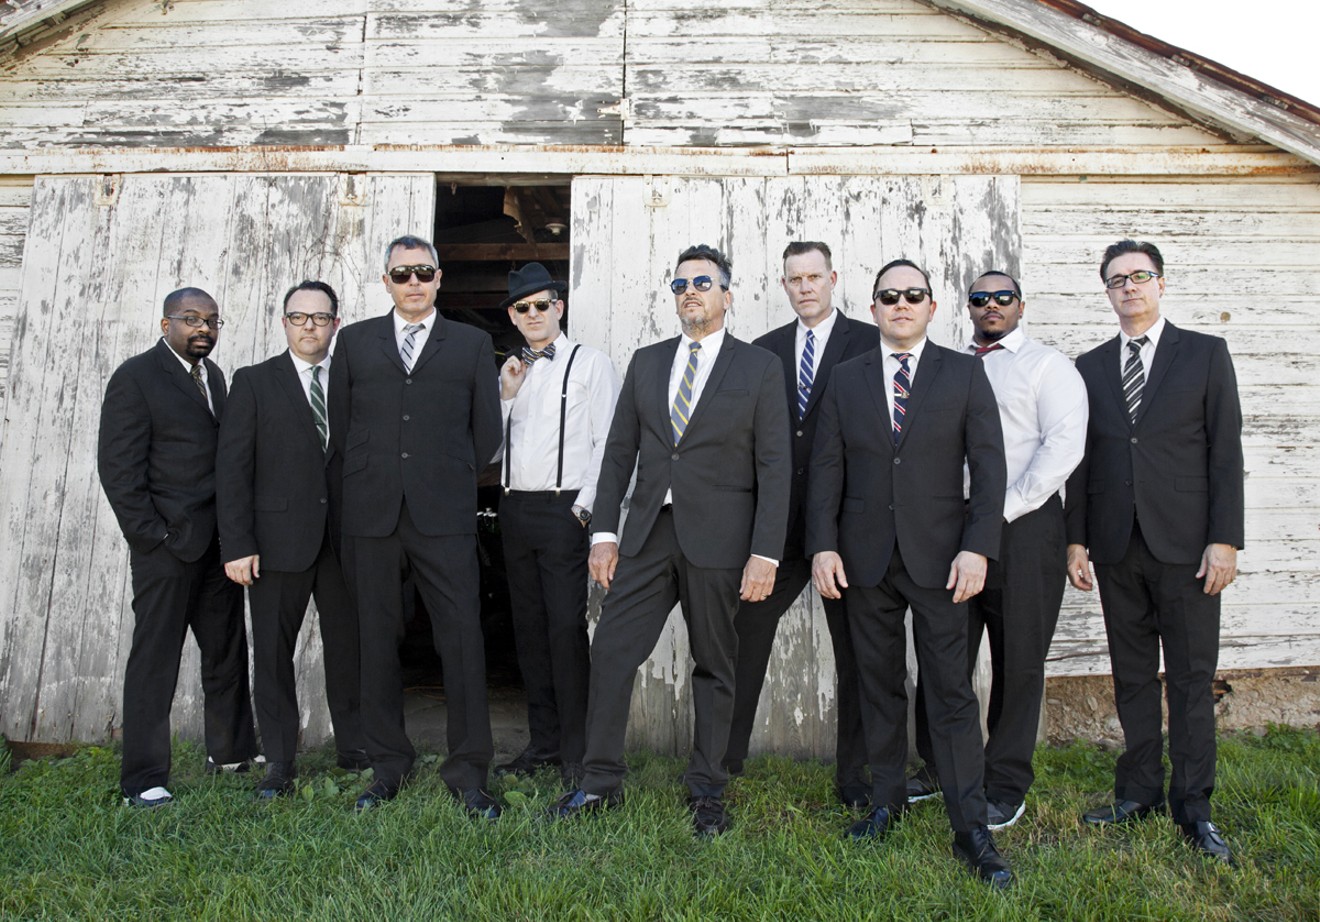 See The Mighty Mighty Bosstones on Saturday.